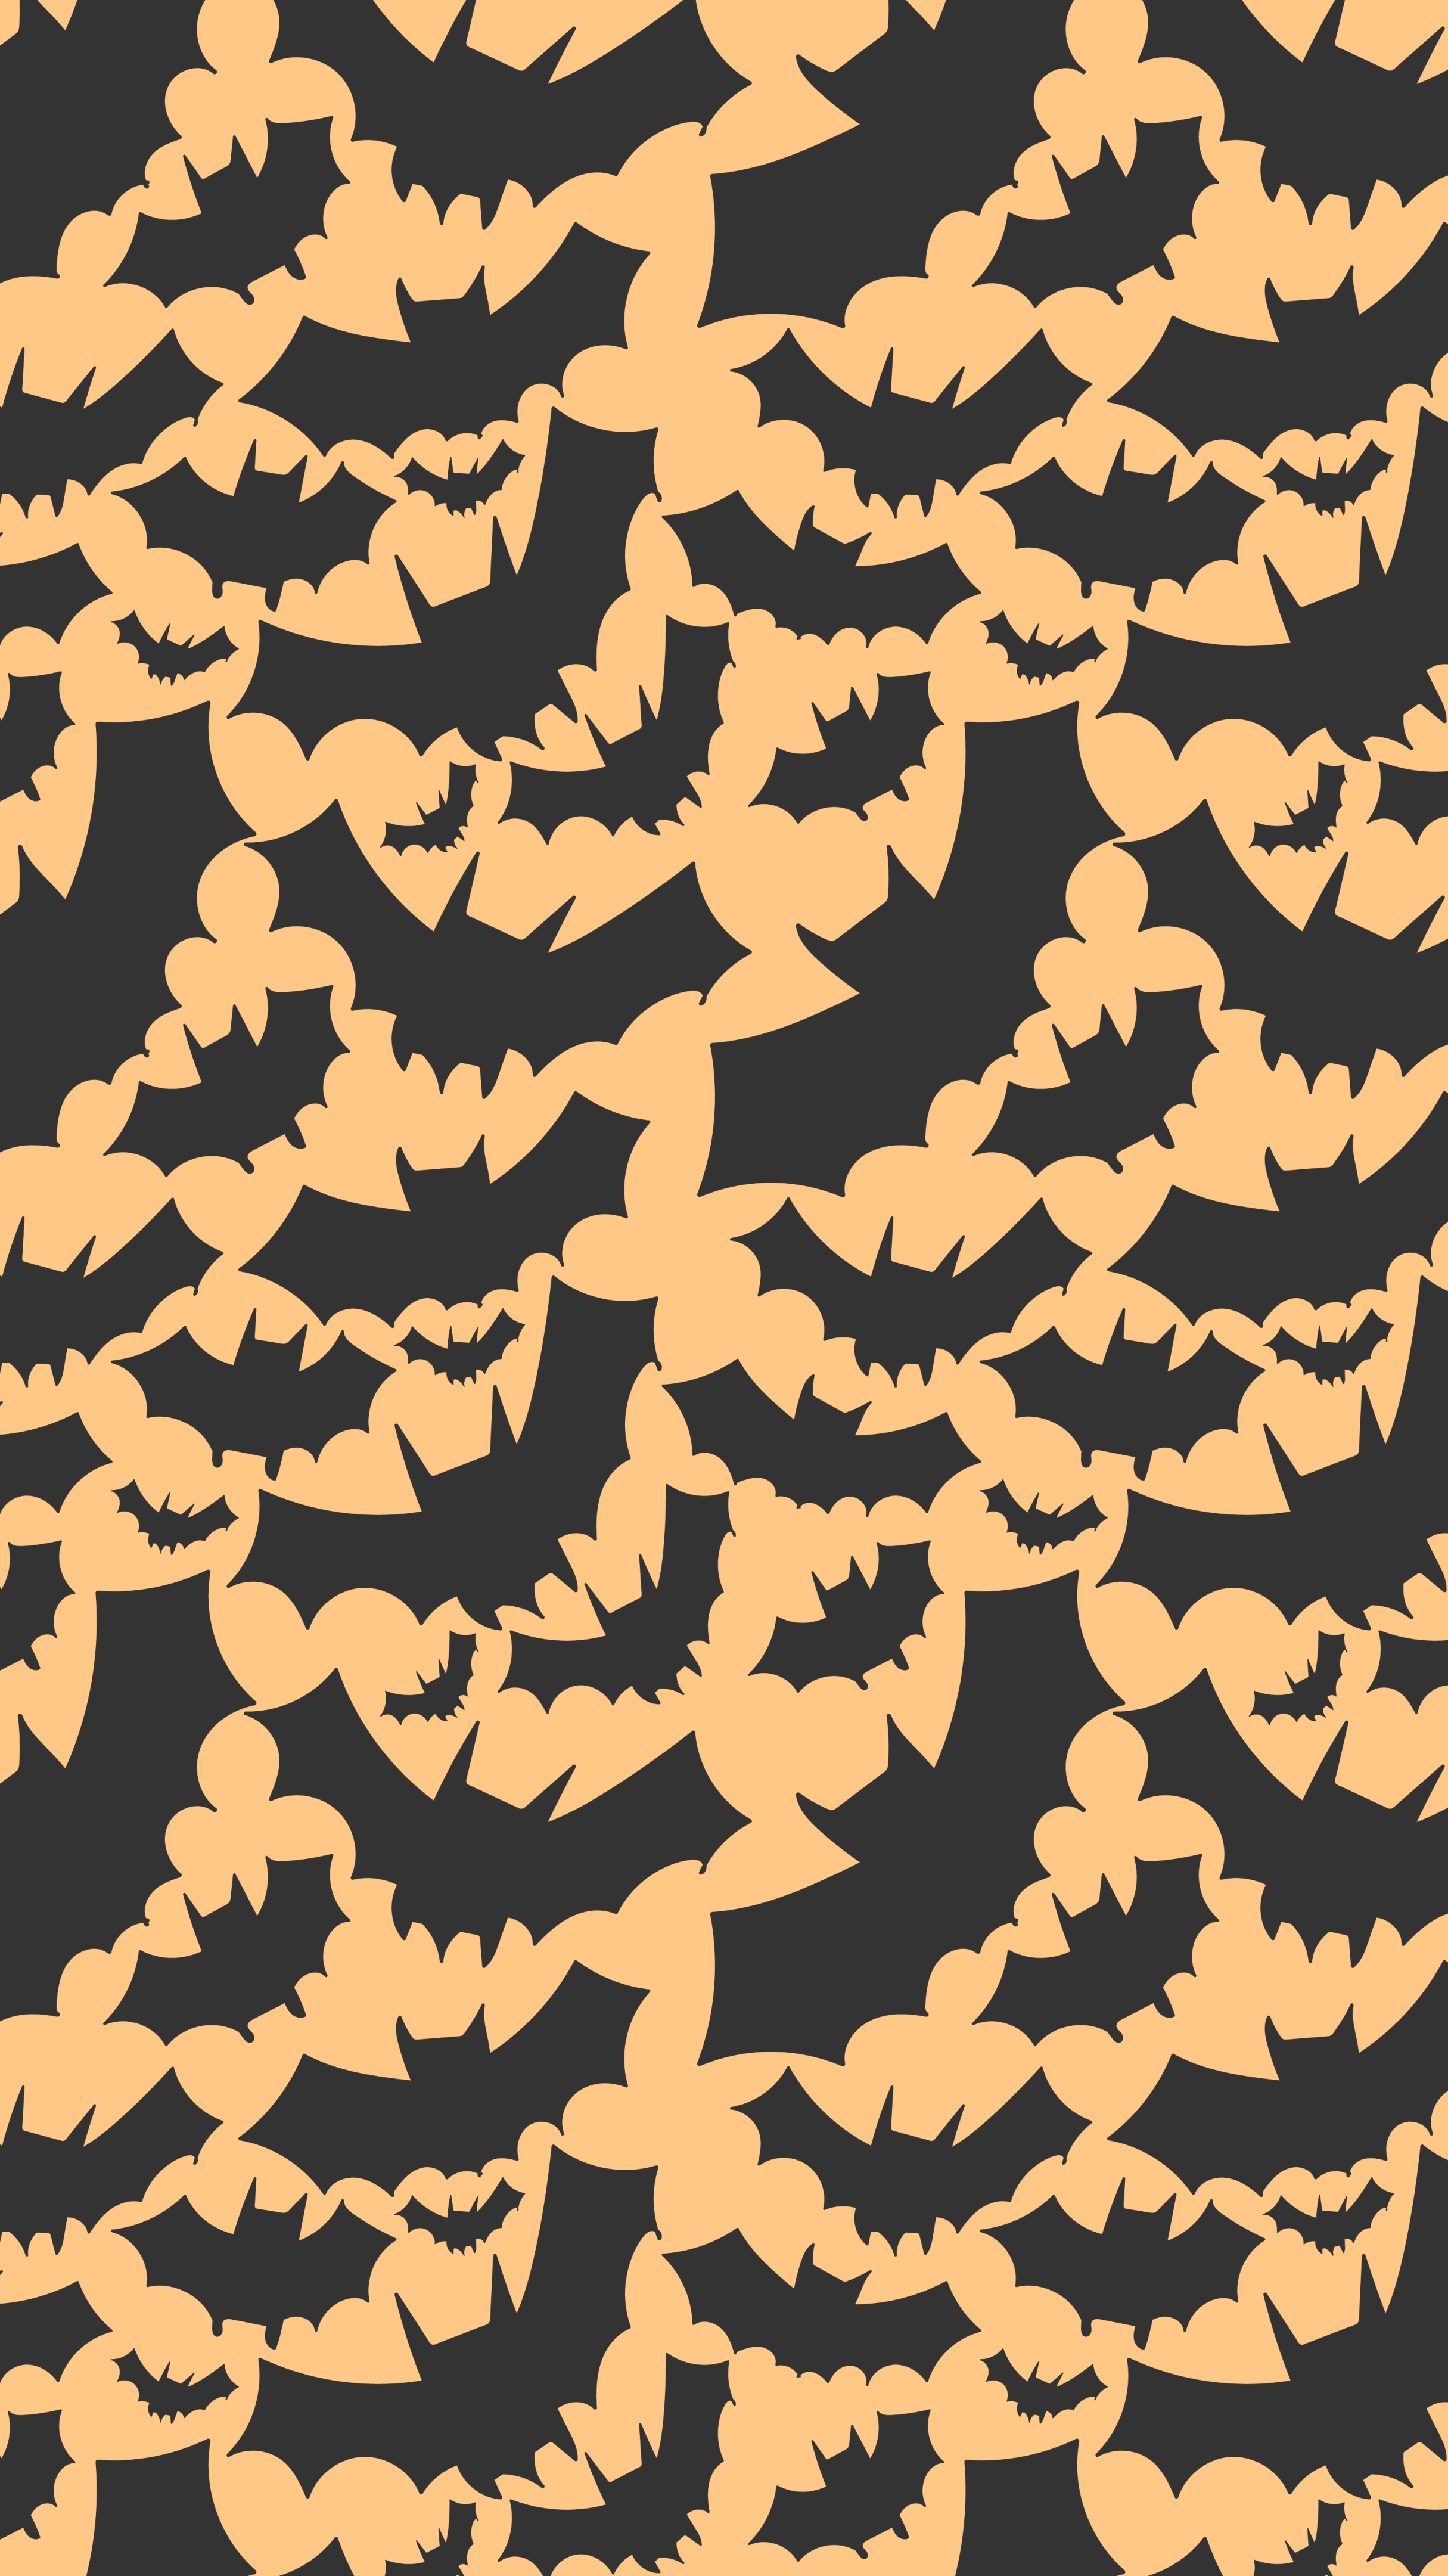 Absolutely Batty and Black Halloween iPhone Wallpaper from Charmed by Stars. Fall wallpaper, Orange wallpaper, Phone background